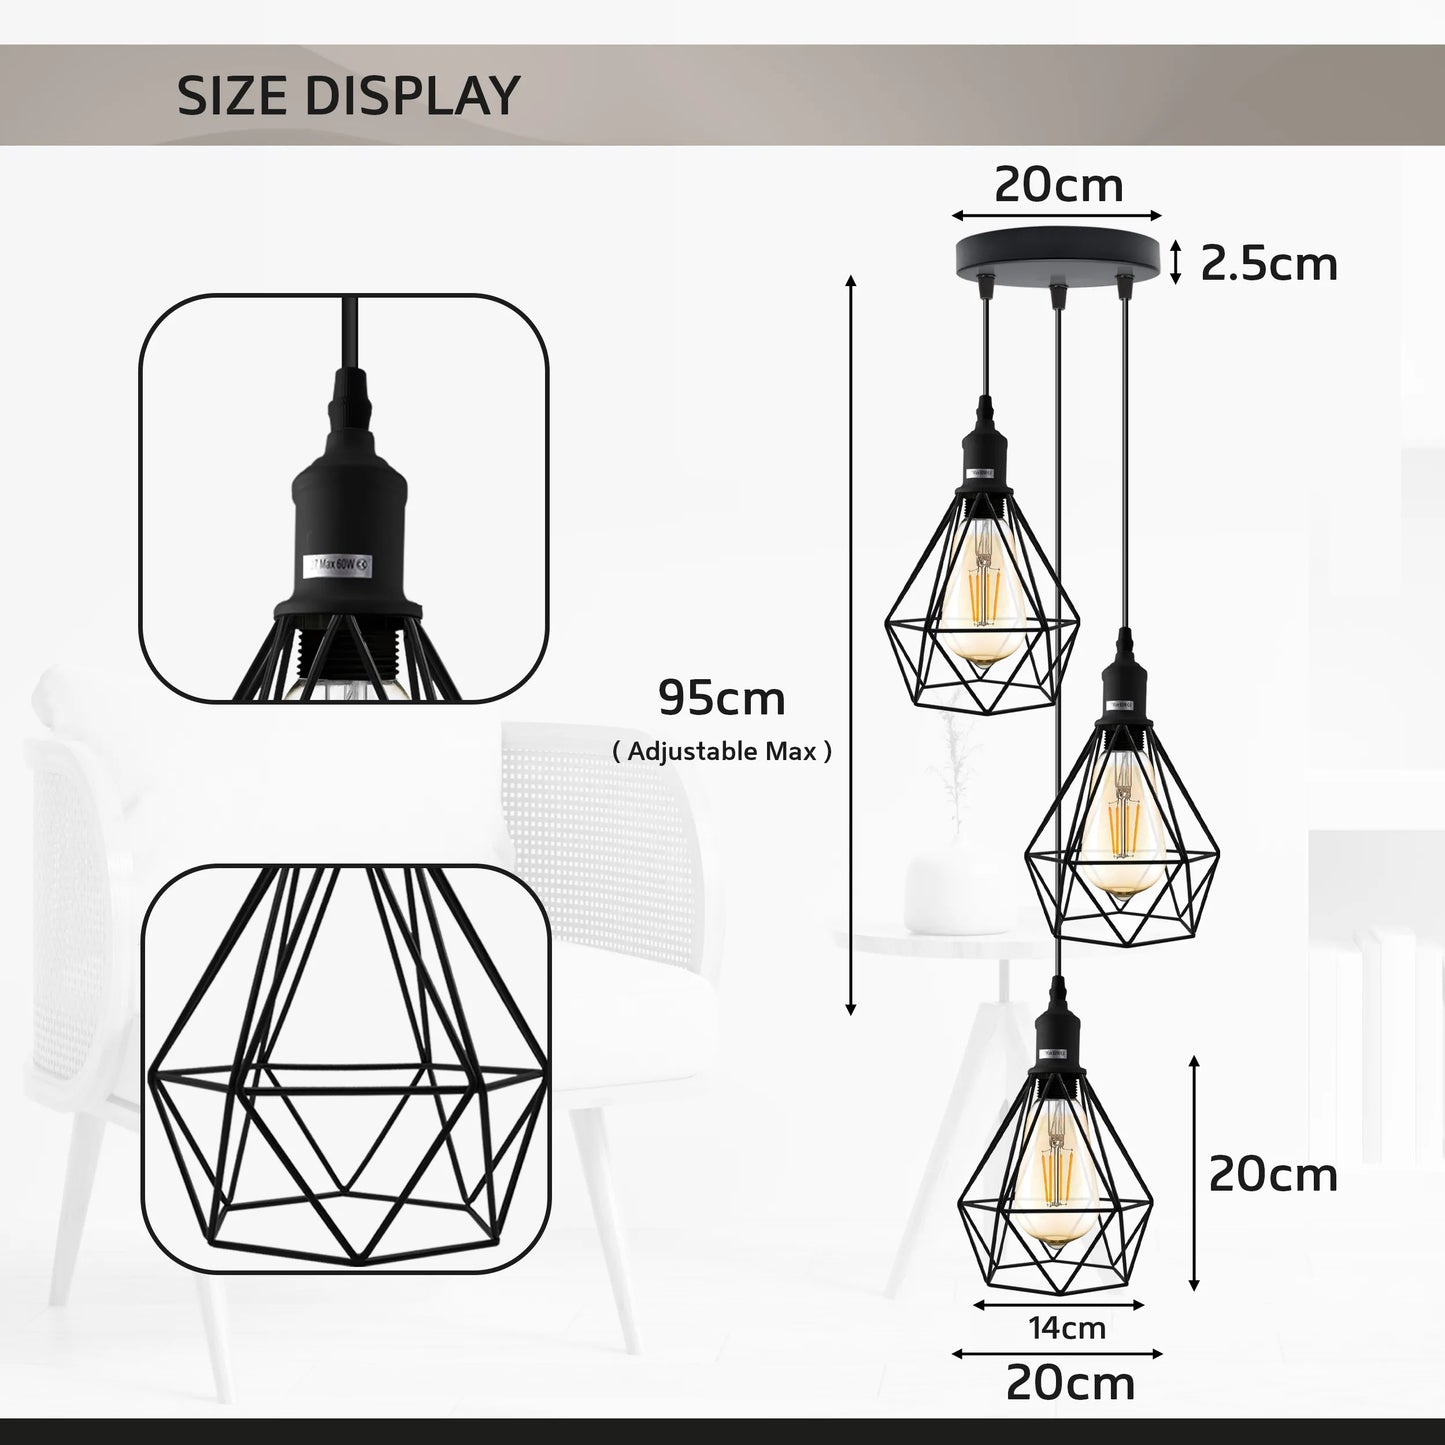 3-way Diamond Cage Shade White Ceiling Pendant Lamp Fittings -Size image